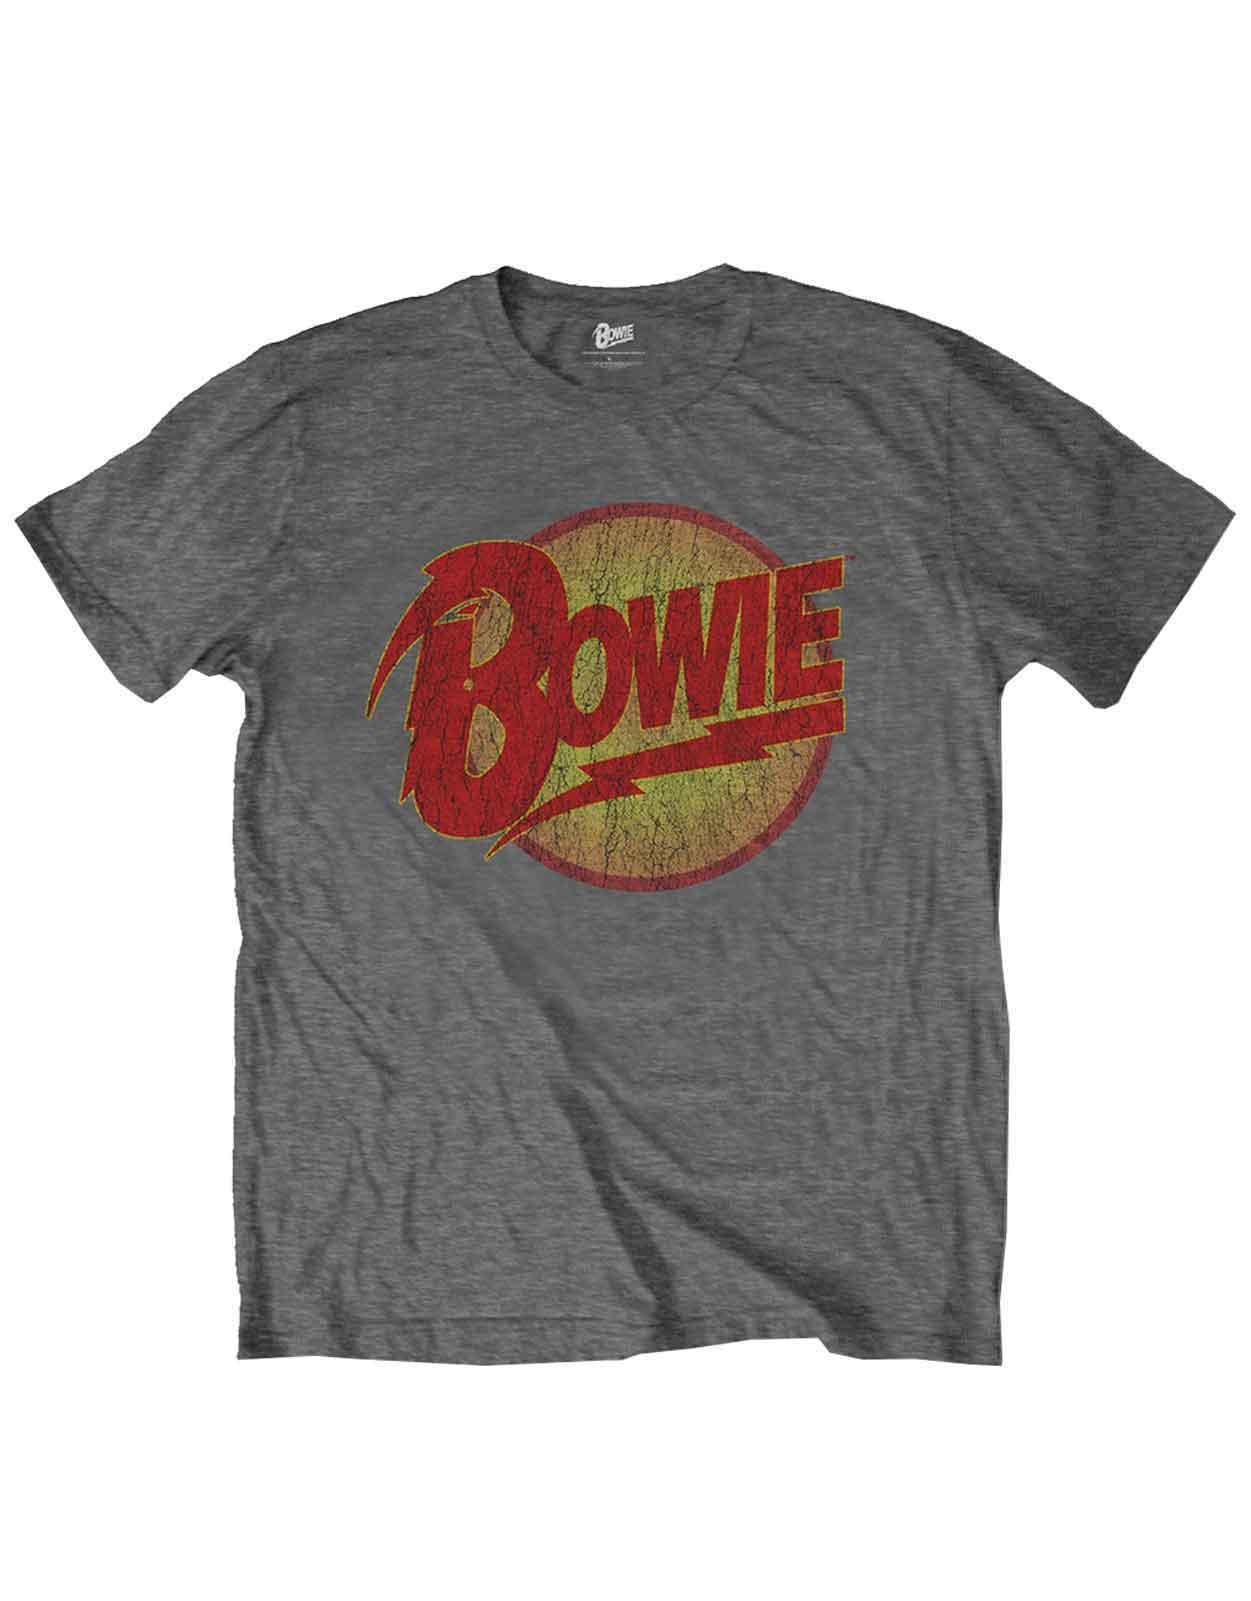 David Bowie Kids T Shirt Diamond Dogs Logo Official Charcoal Grey (Ages 3-14yrs)